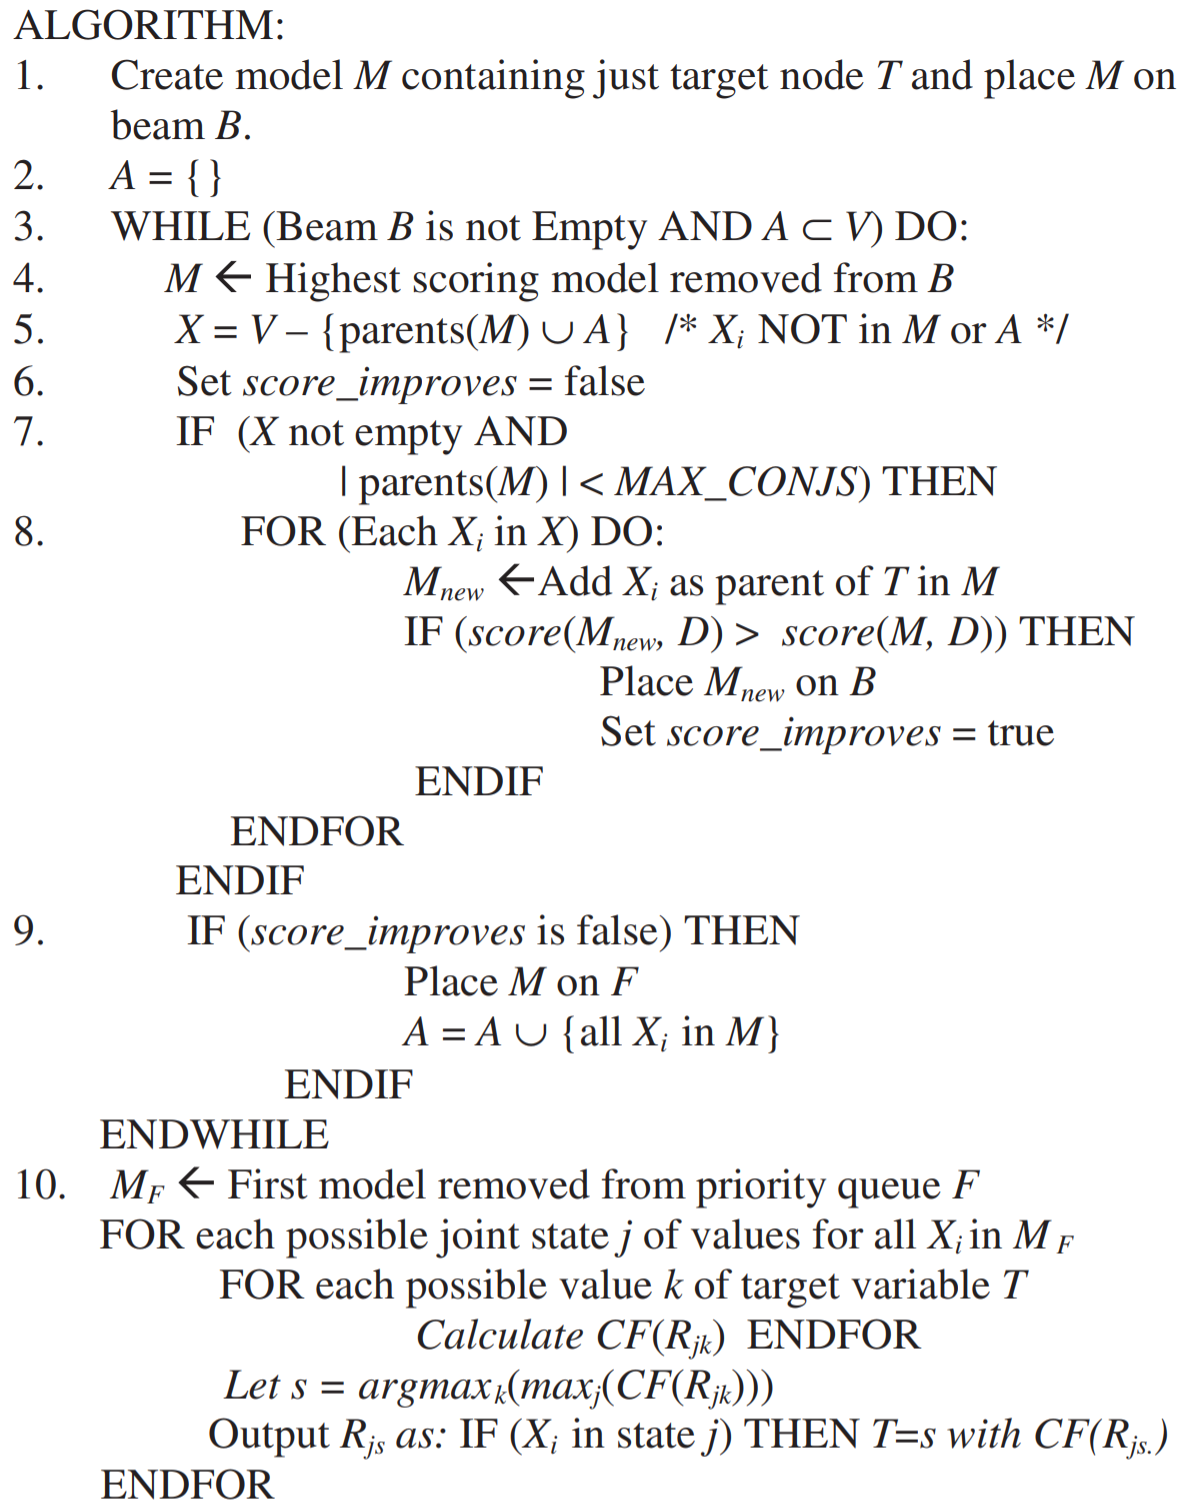 Pseudocode for the BRL algorithm copied from the paper.